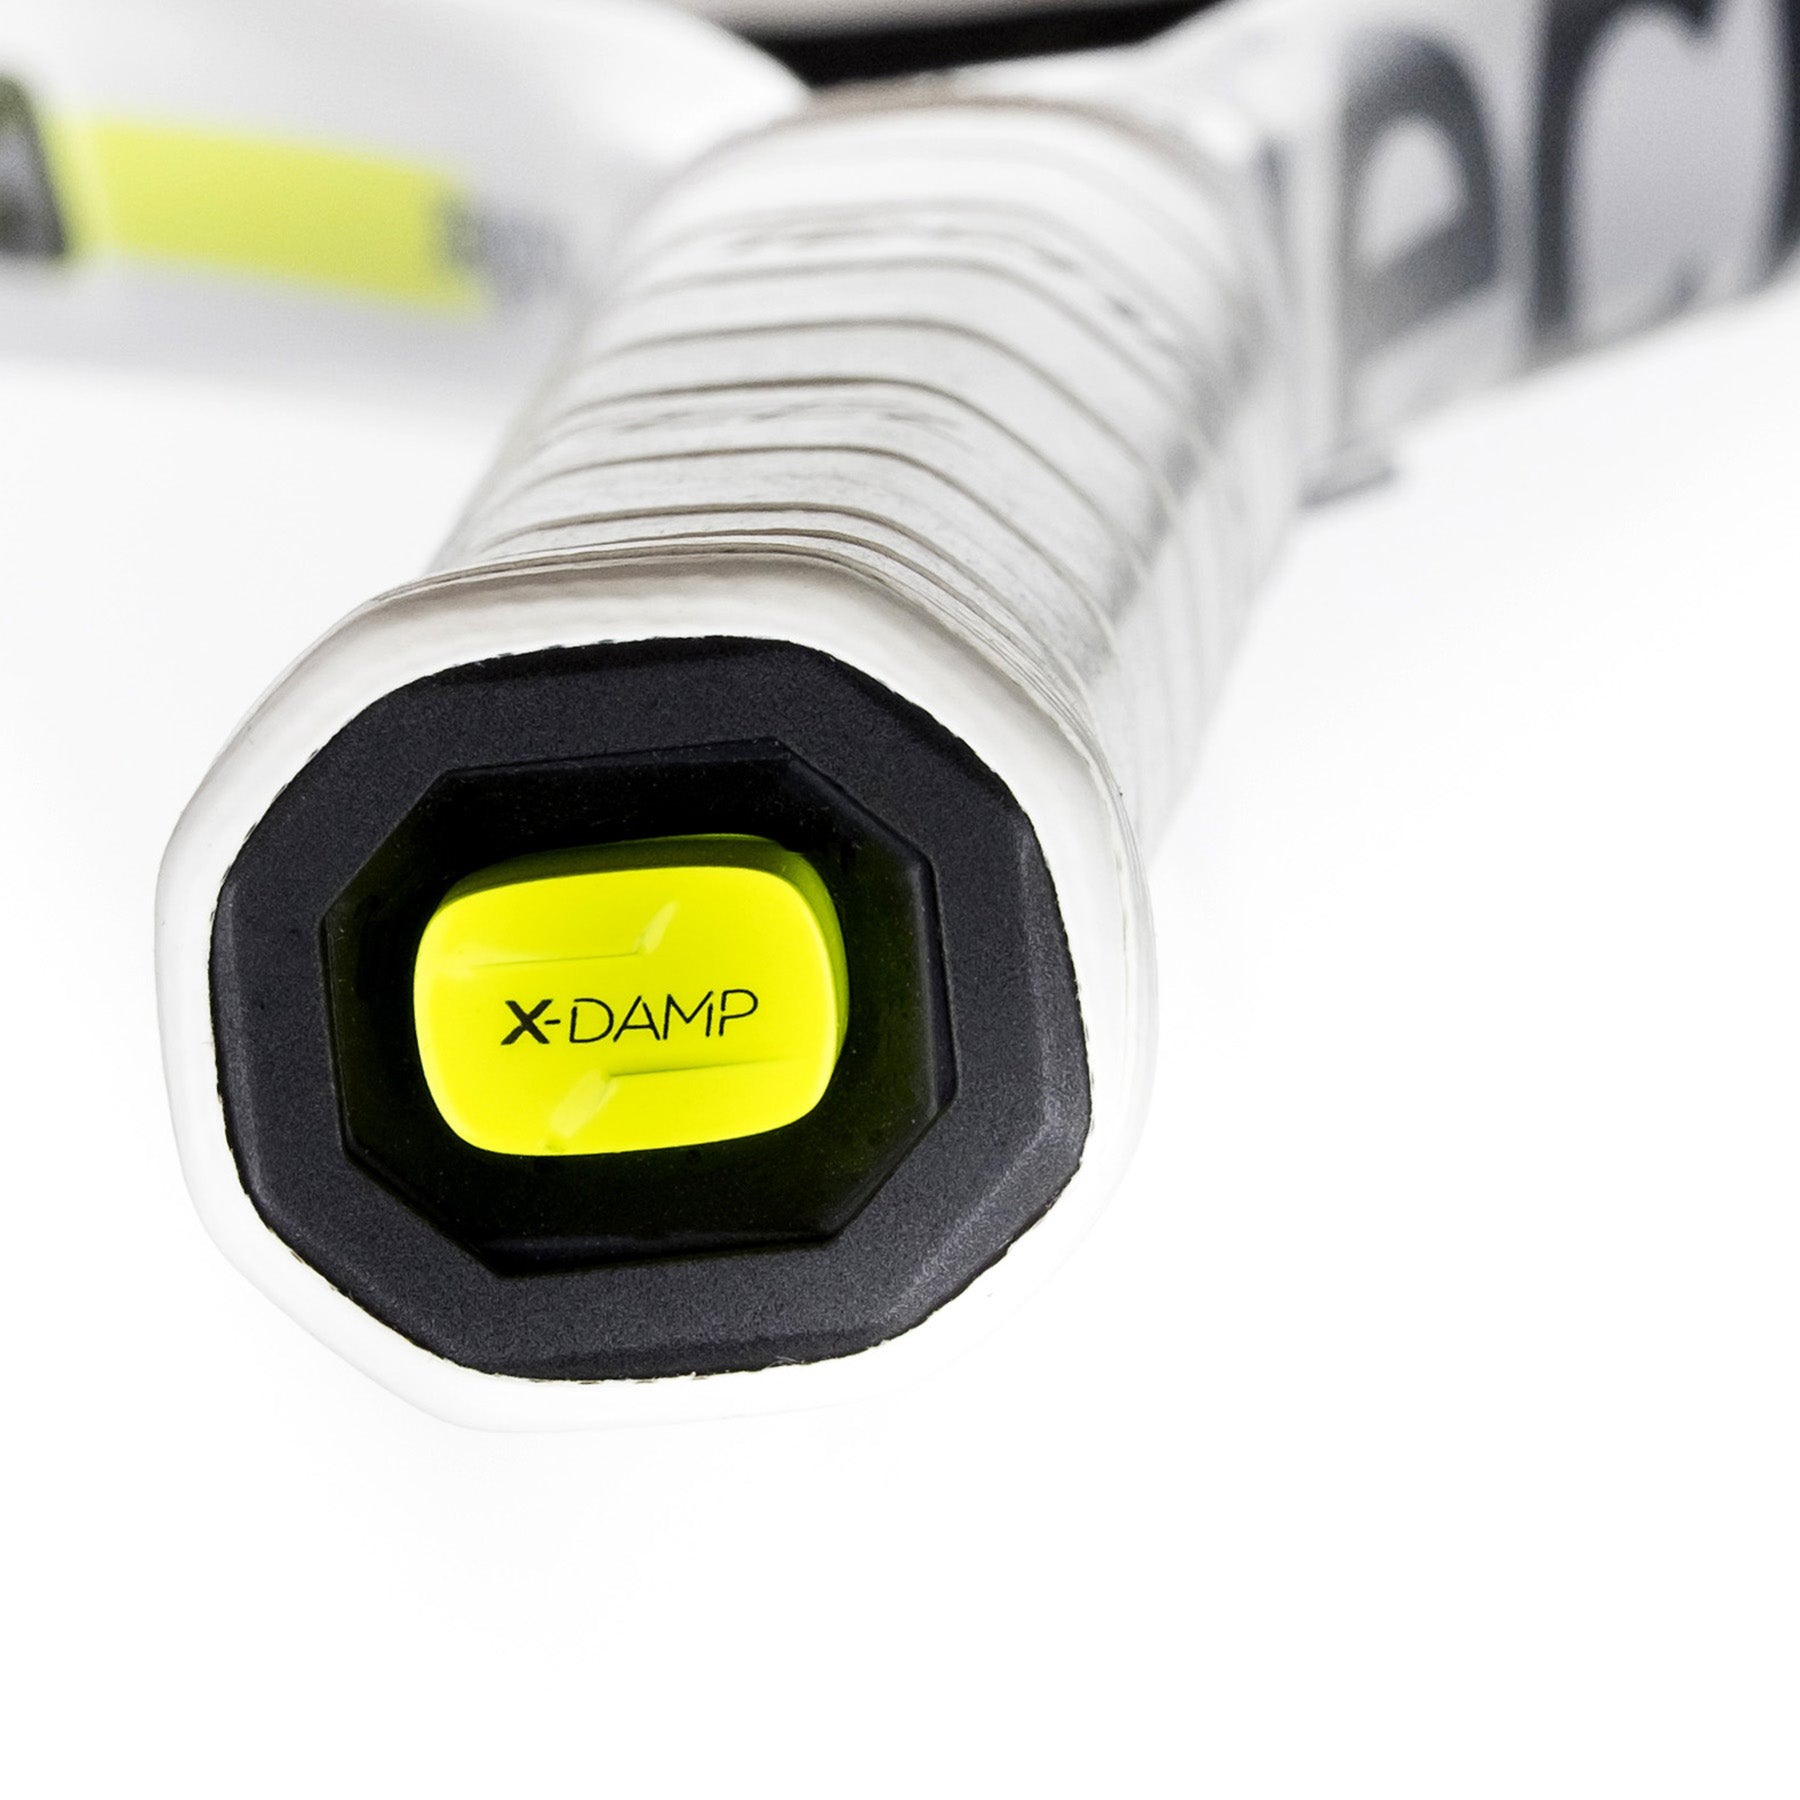 Handle of the Tecnifibre TF-X1 300 Tennis Racket featuring X-Damp technology